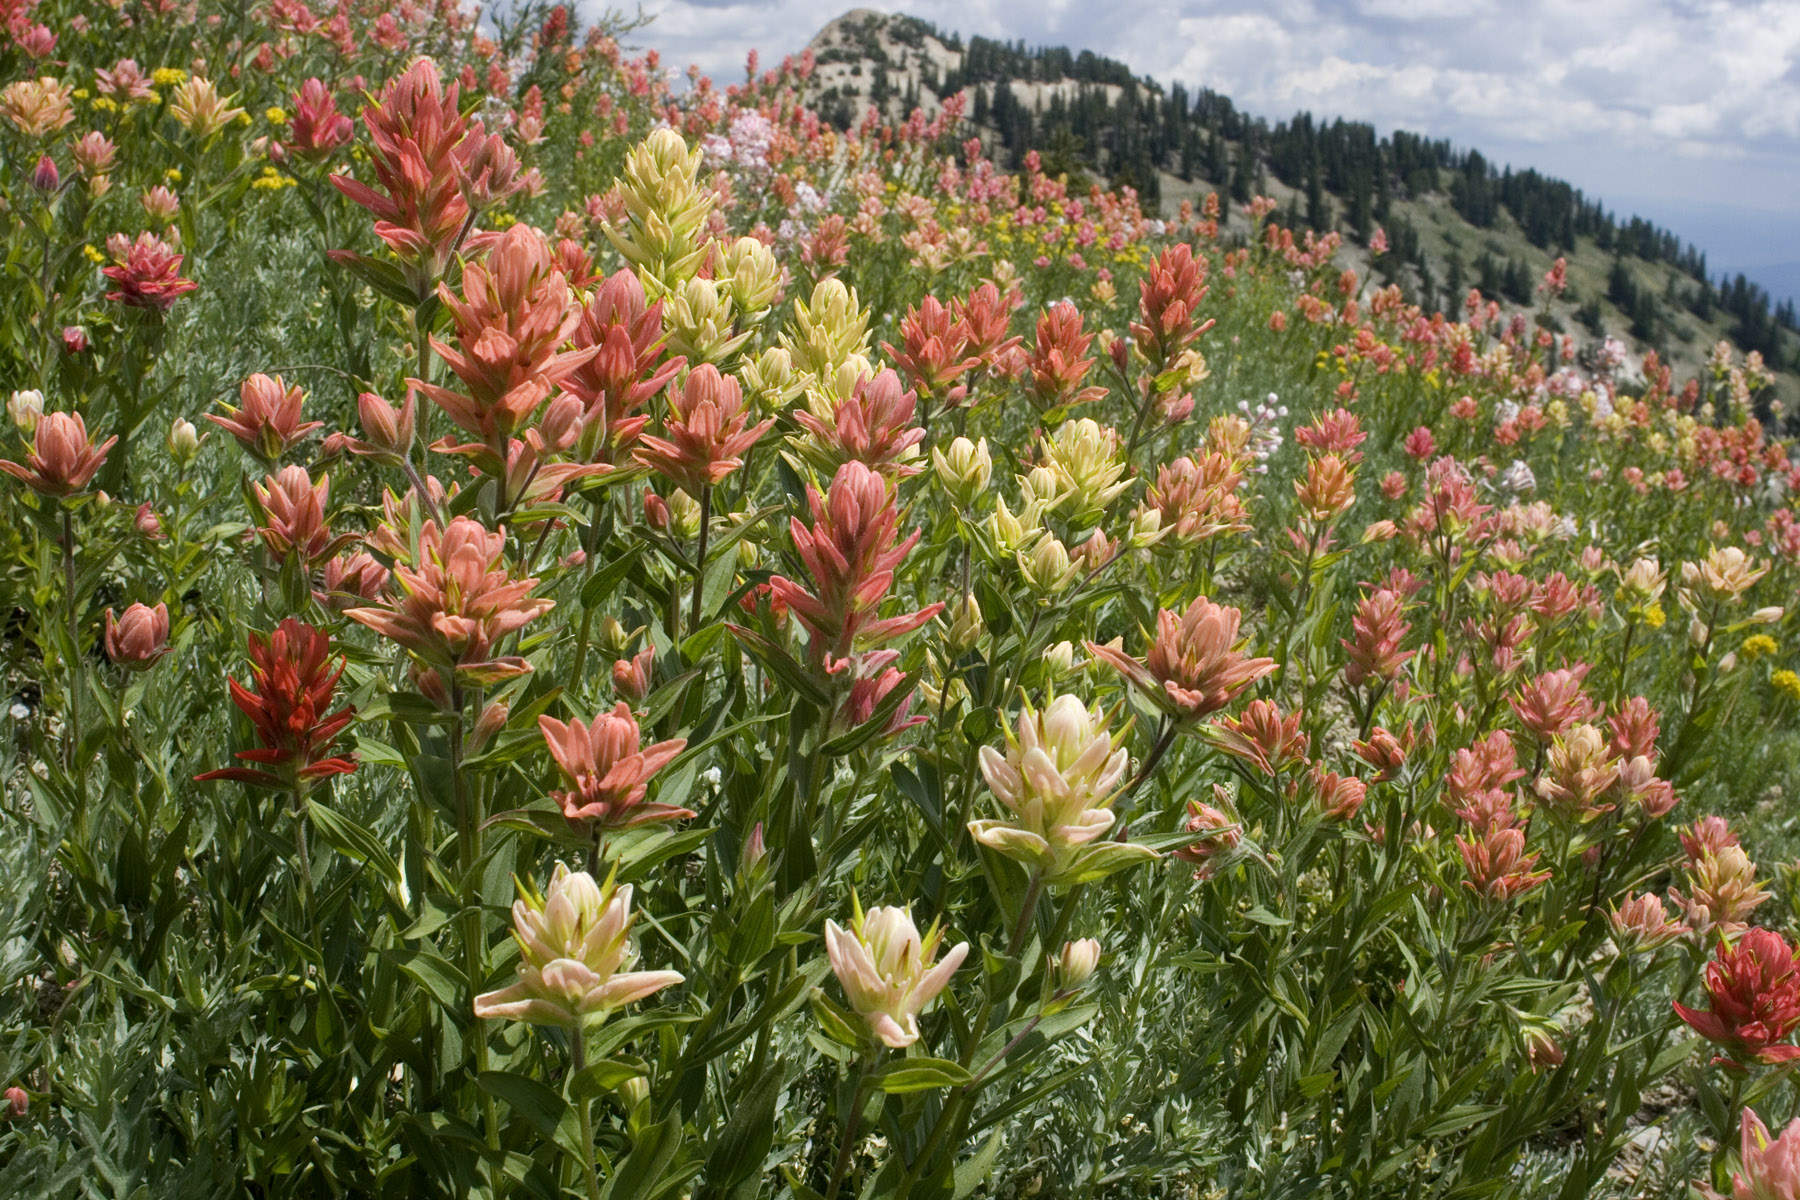 A field of Indian paintbrush displaying a variety of yellows and pinks